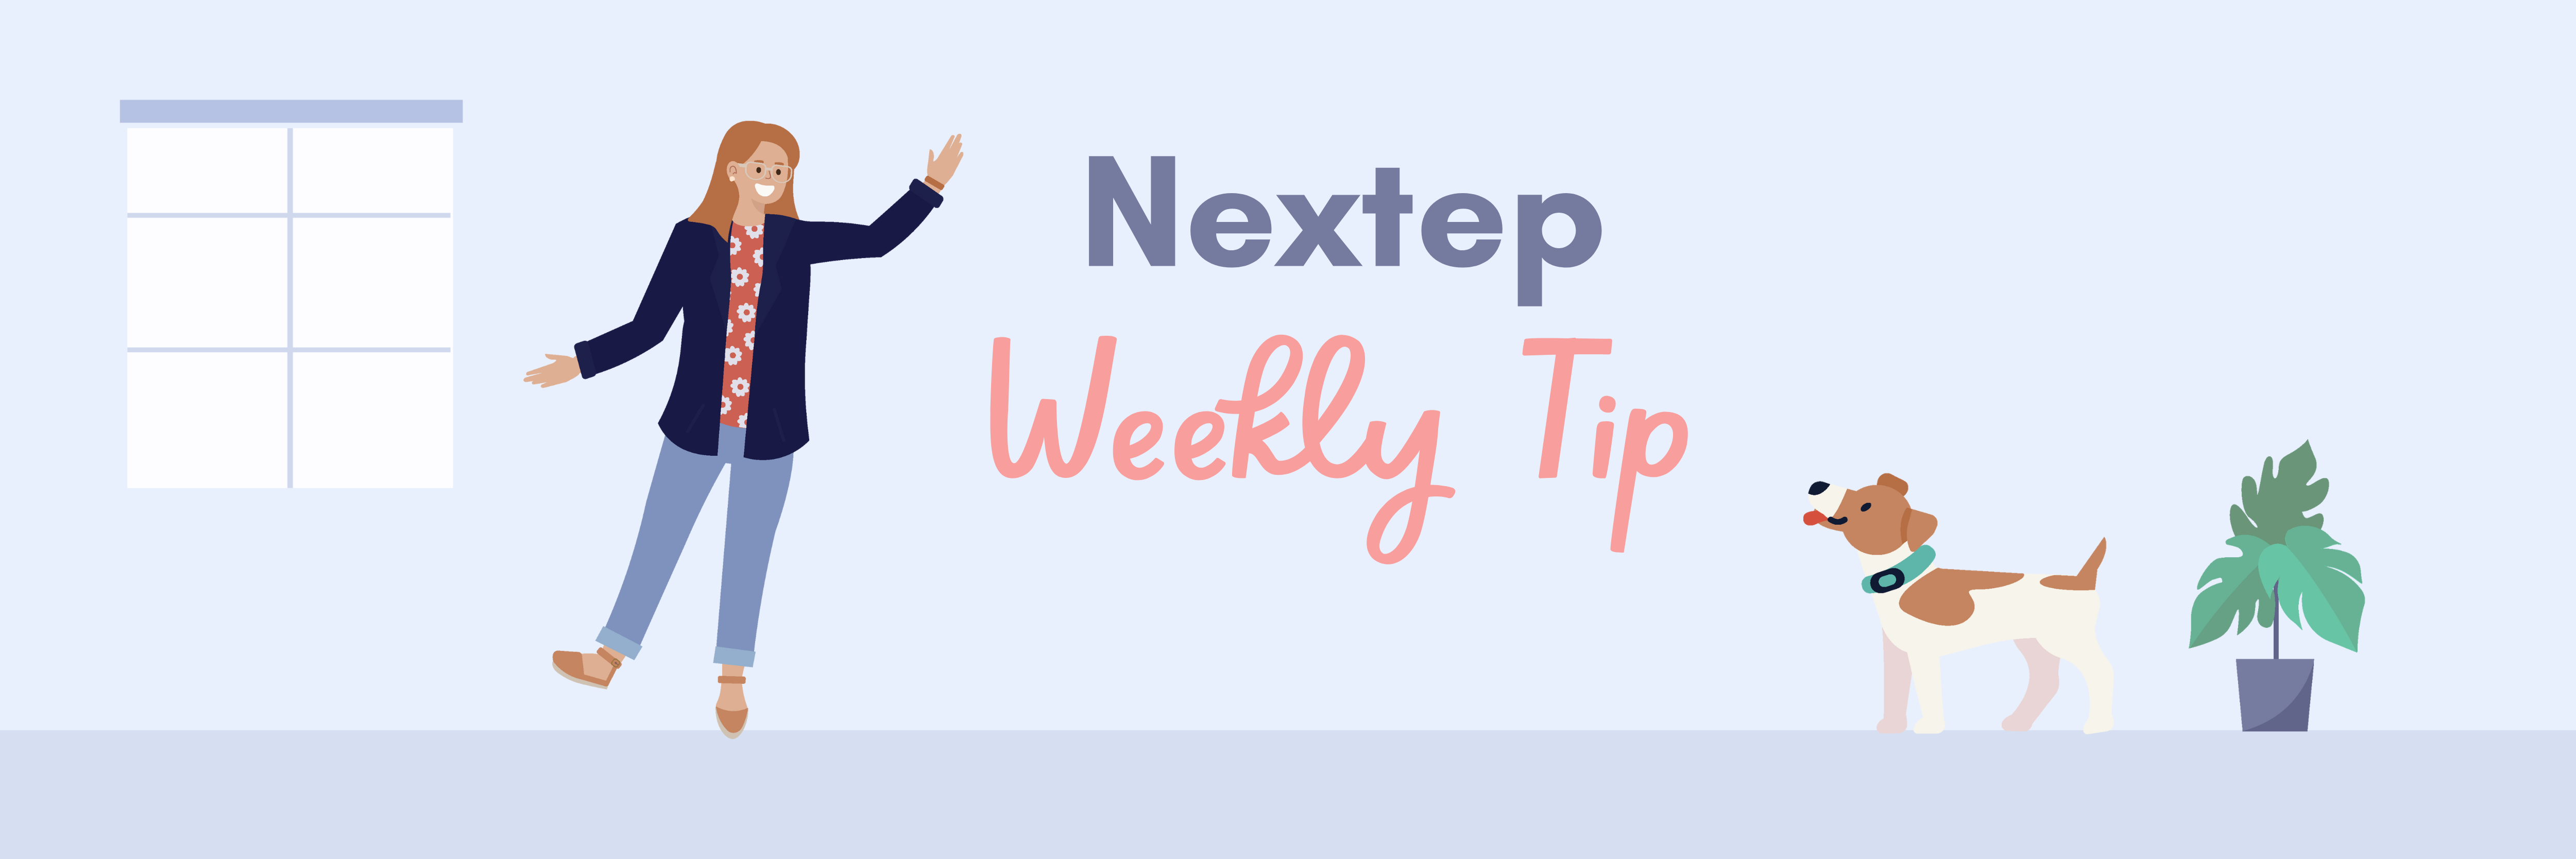 Download your new hire checklist, courtesy of Nextep